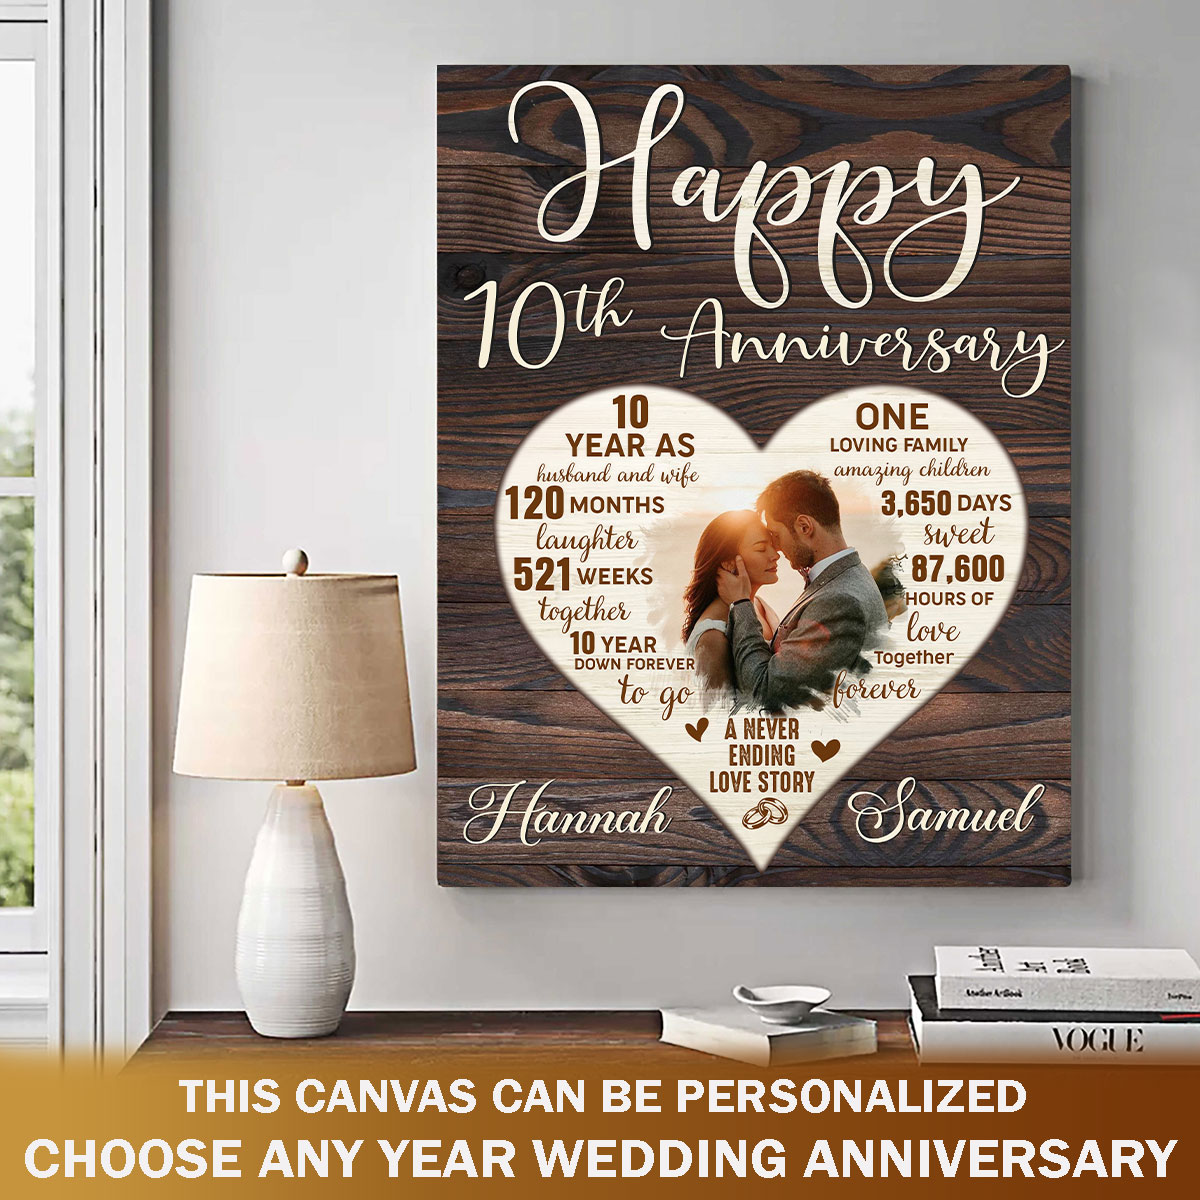 Personalized Anniversary Gifts by Year A Guide to Celebrating Your Love